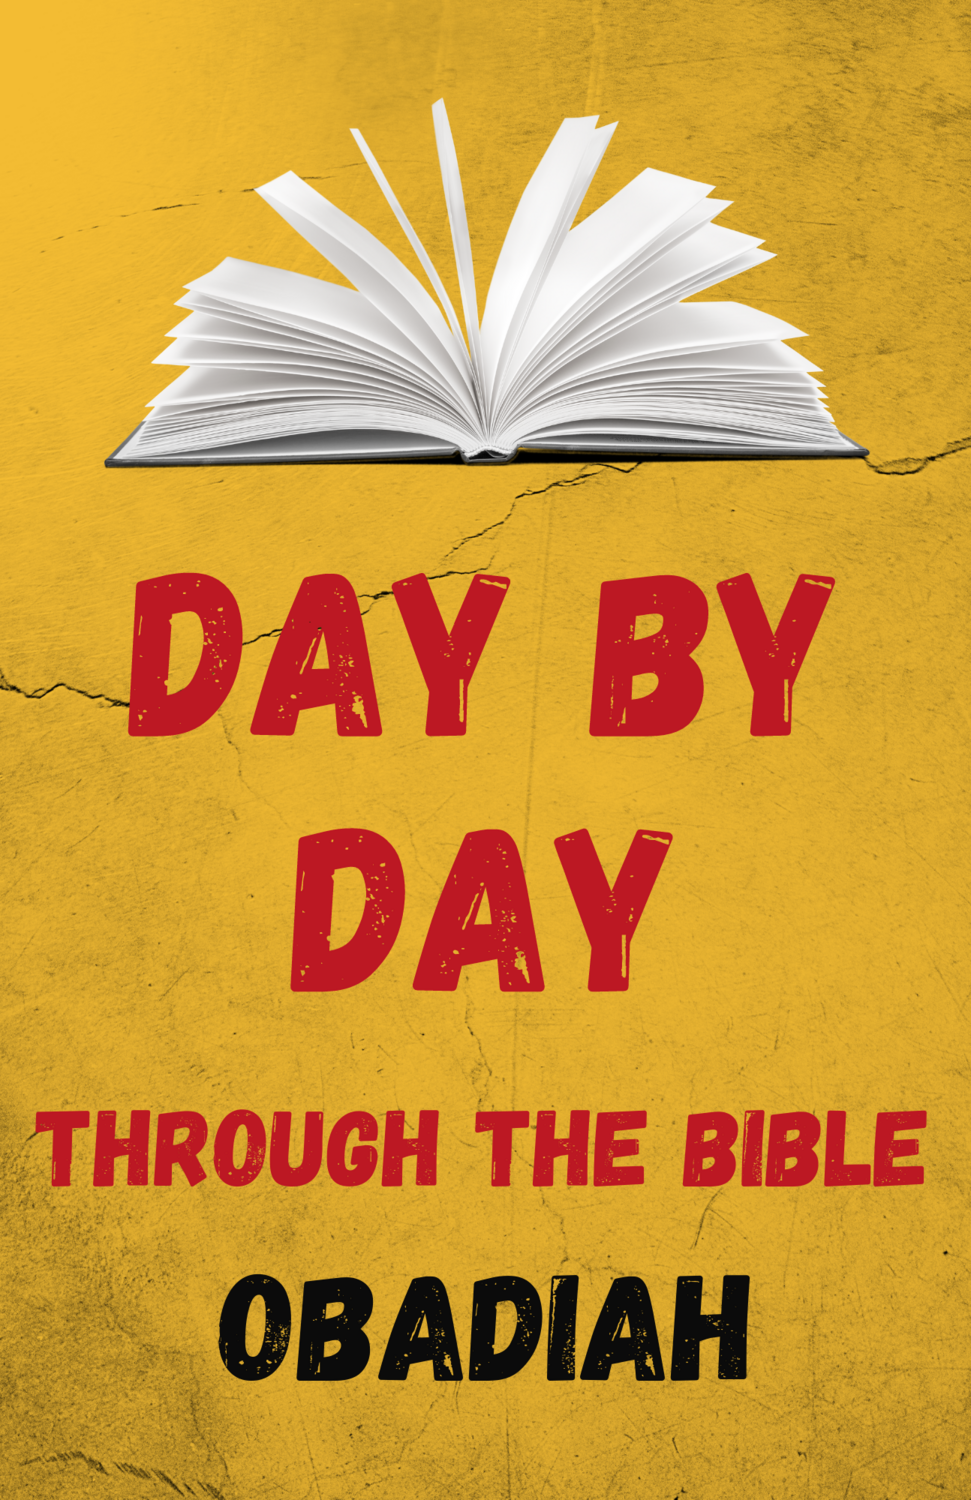 Day By Day Through the Bible: One Day in Obadiah - Digital Download